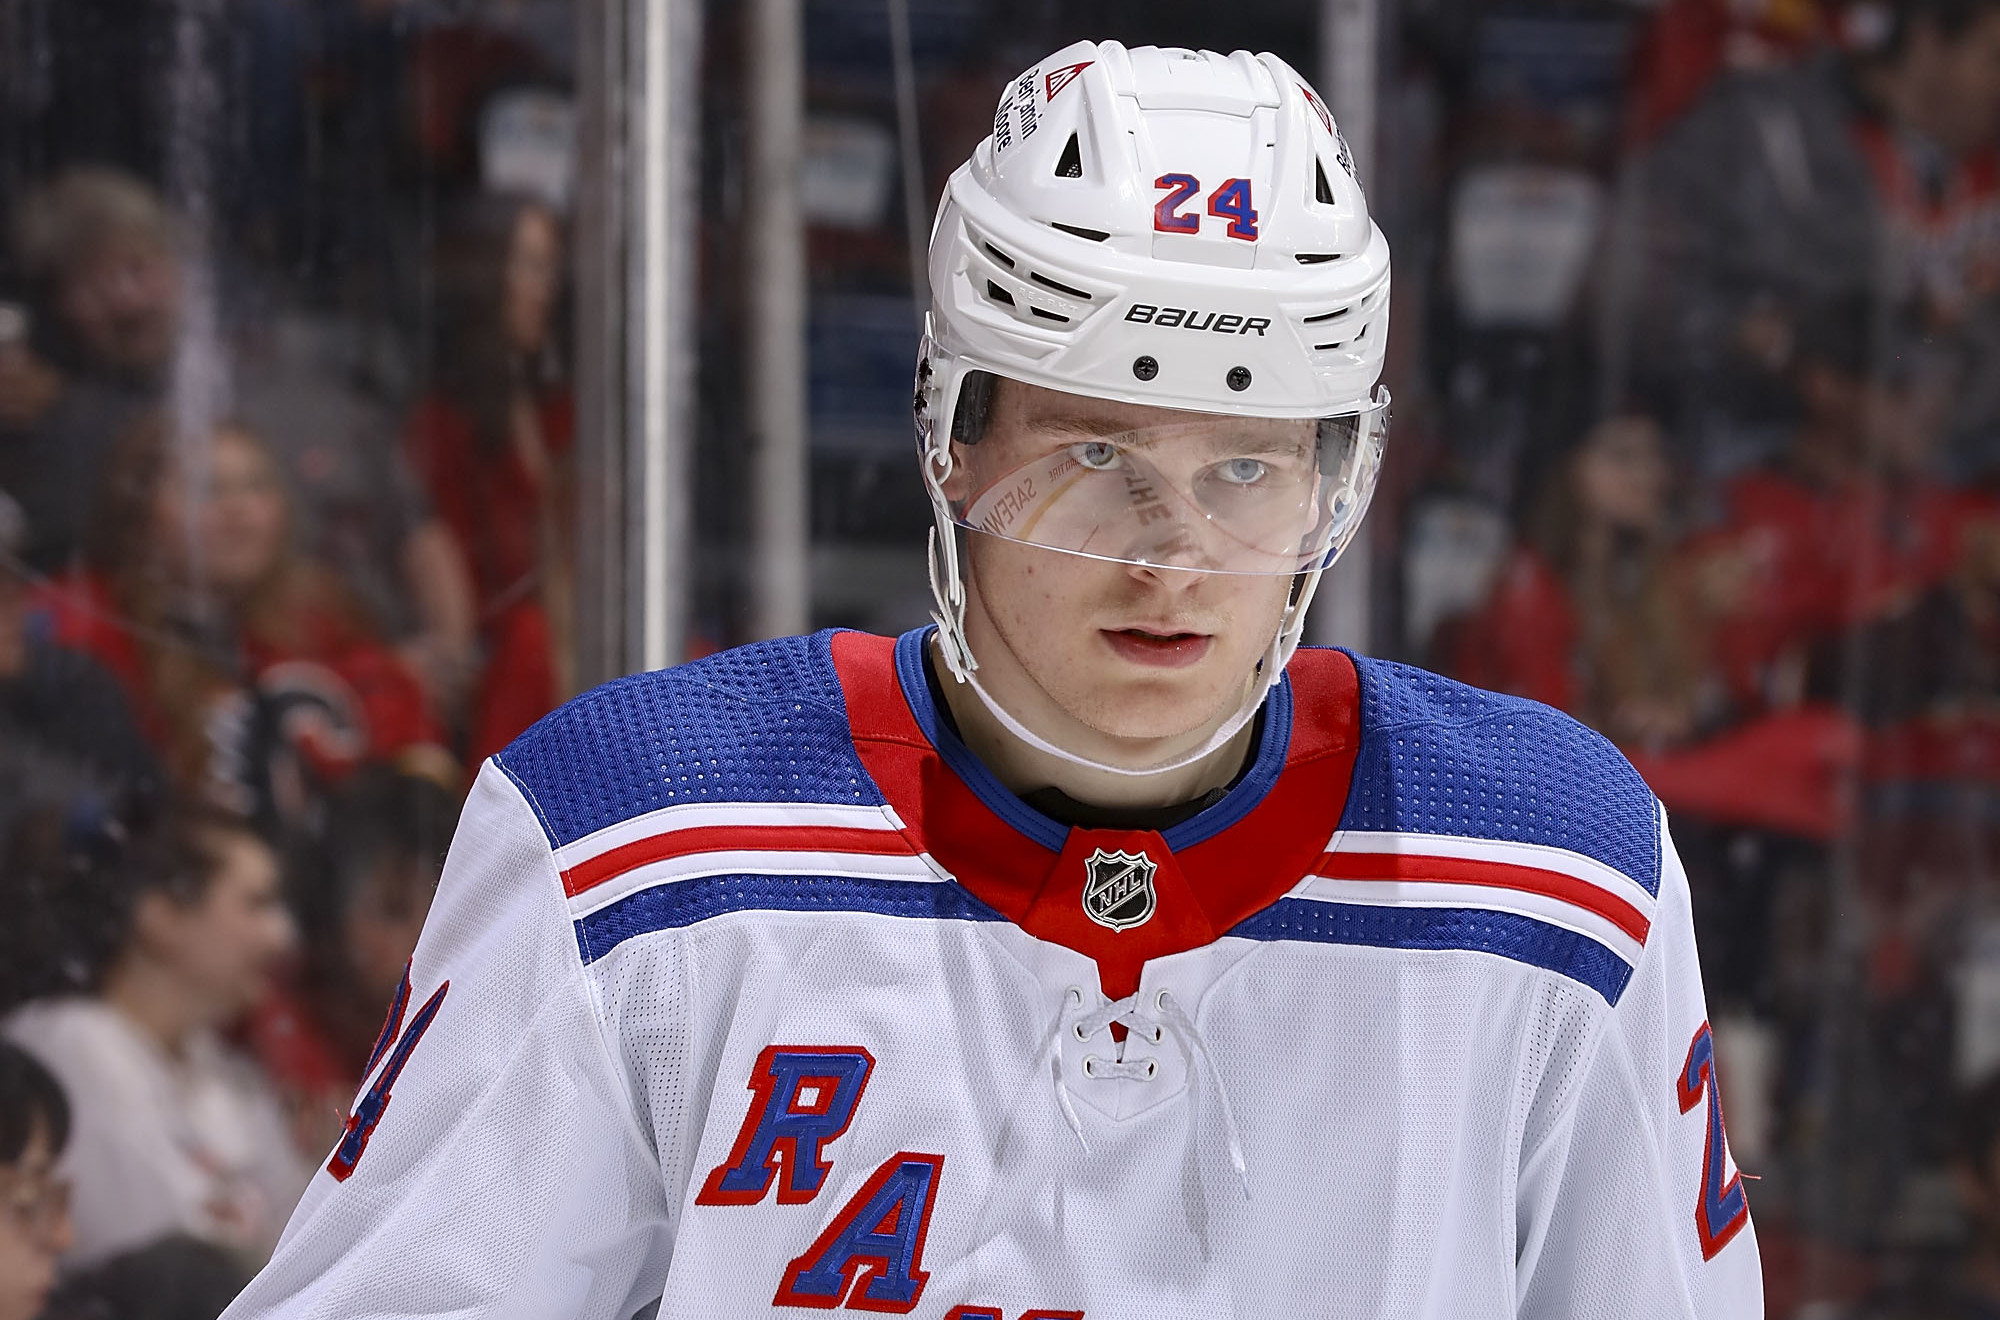 Rangers place DeAngelo on waivers, look to bolster physicality